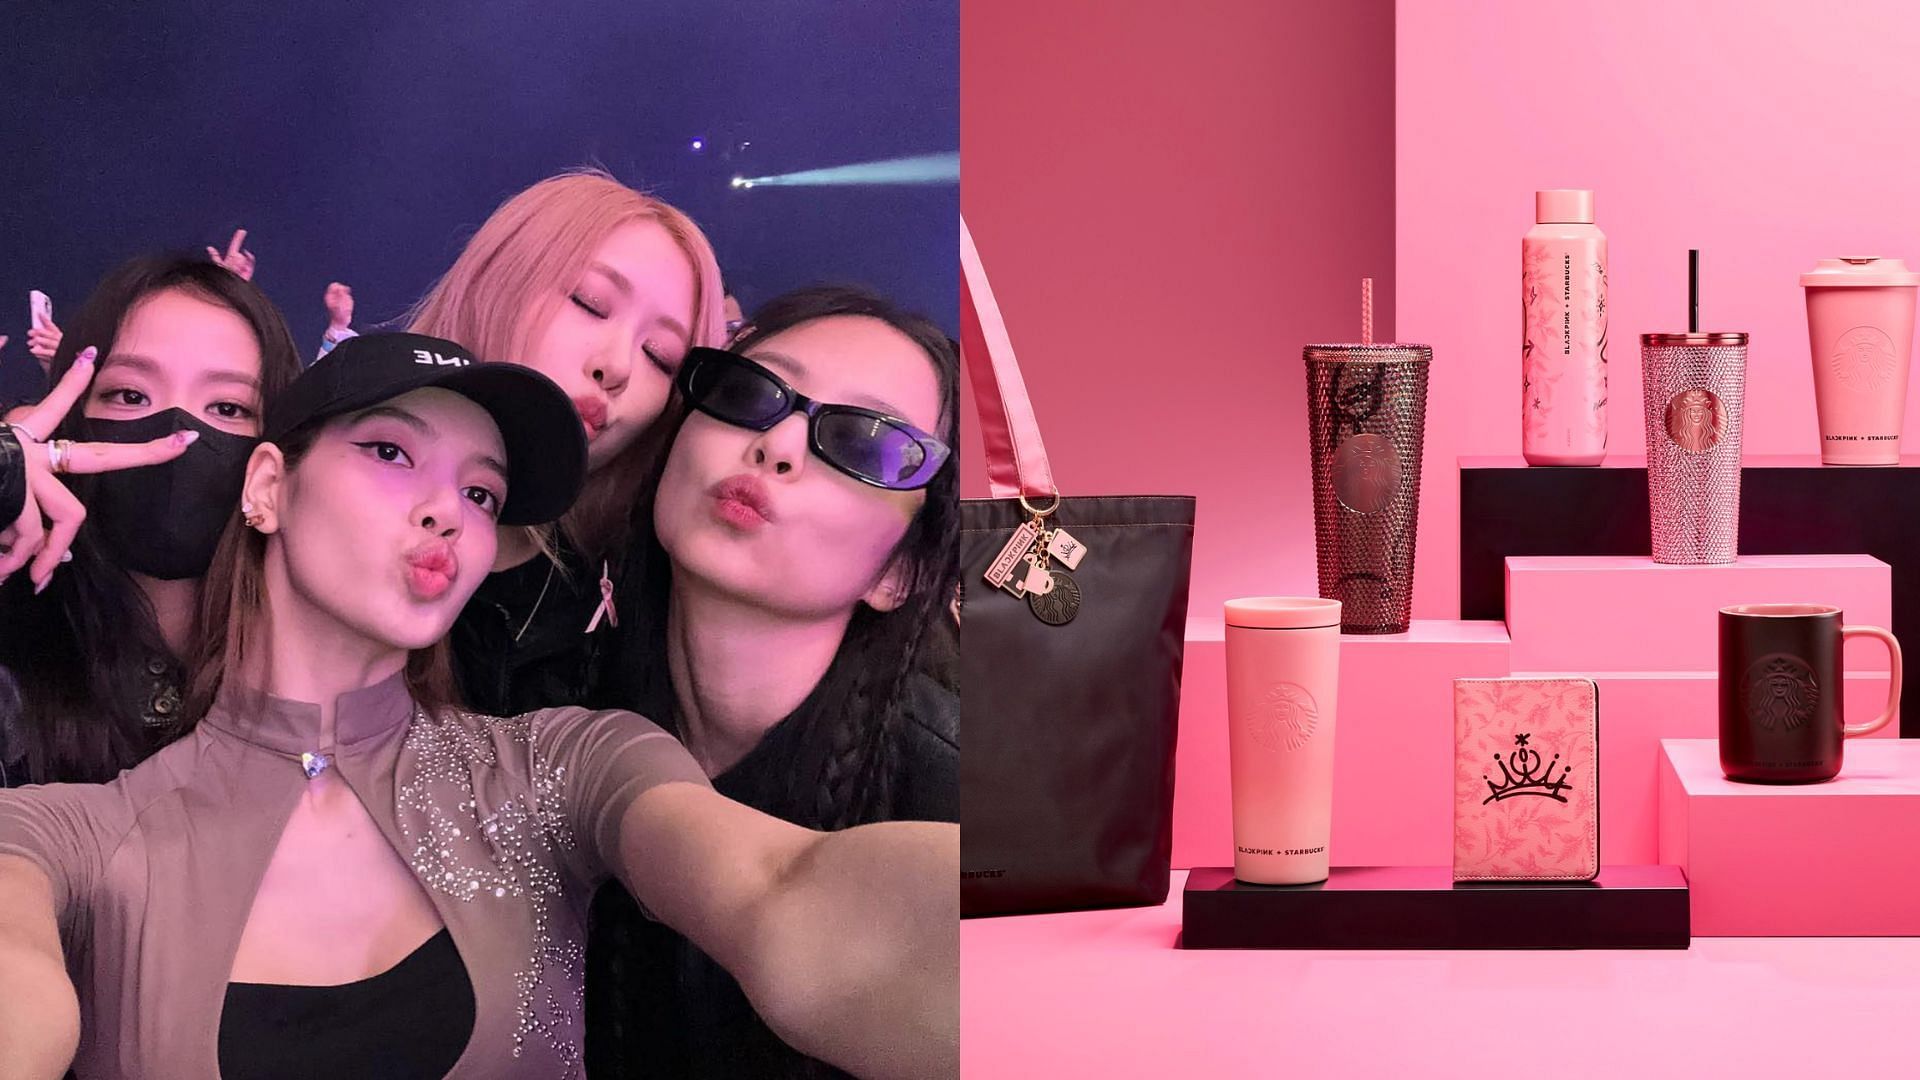 BLACKPINK X Starbucks Collection Where to buy, price, and more